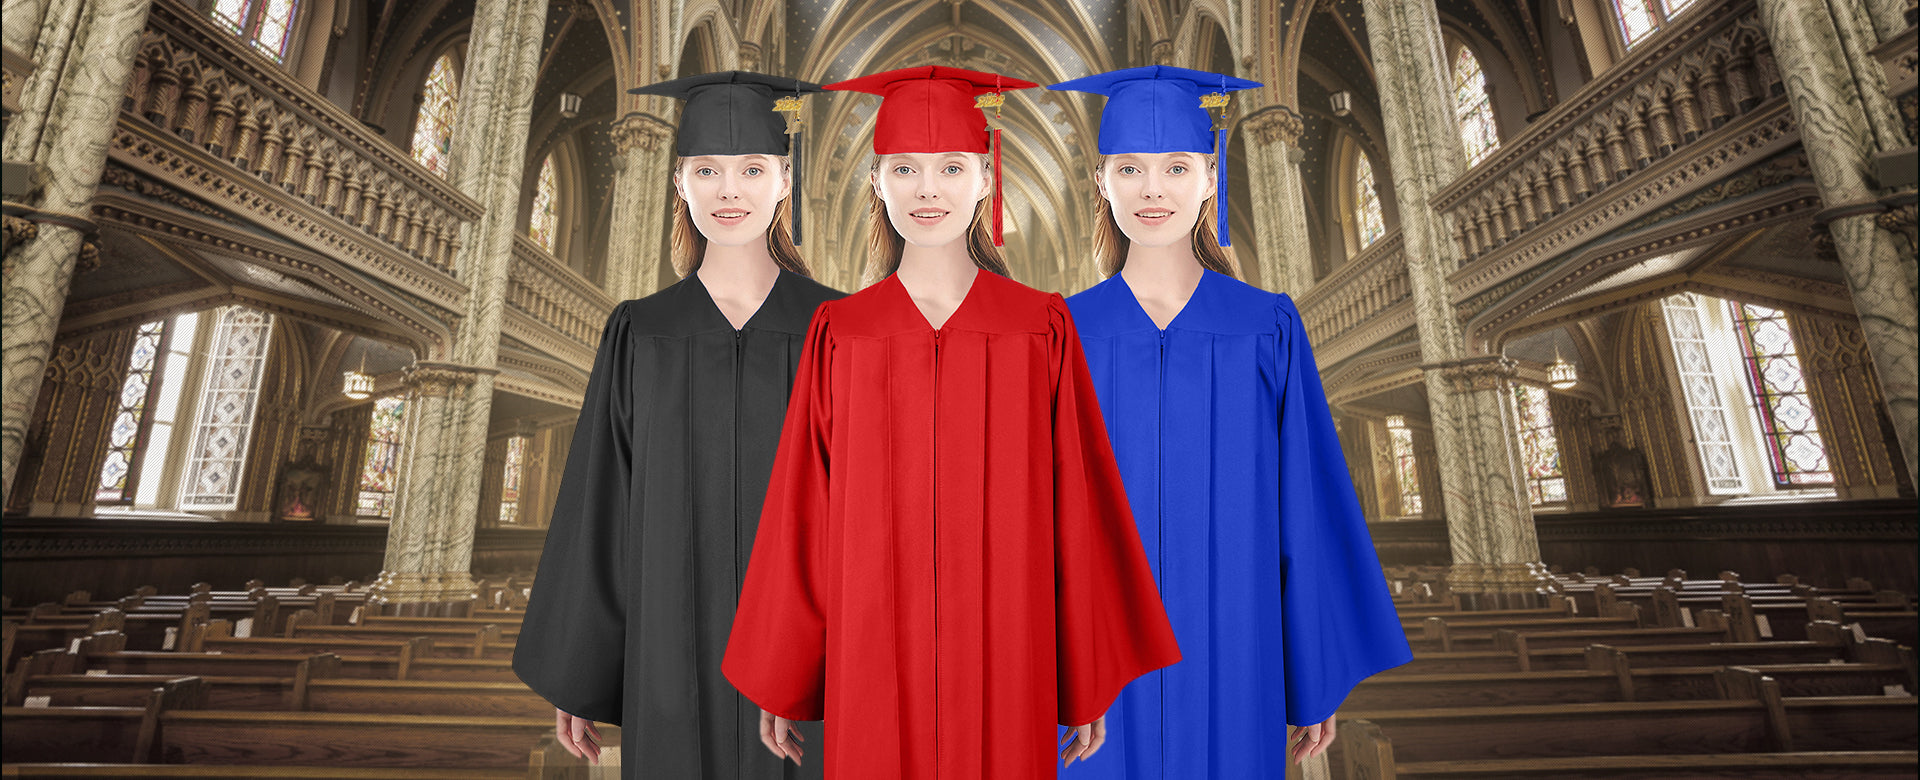 Graduation Caps and Gowns for Middle and High School for Sale